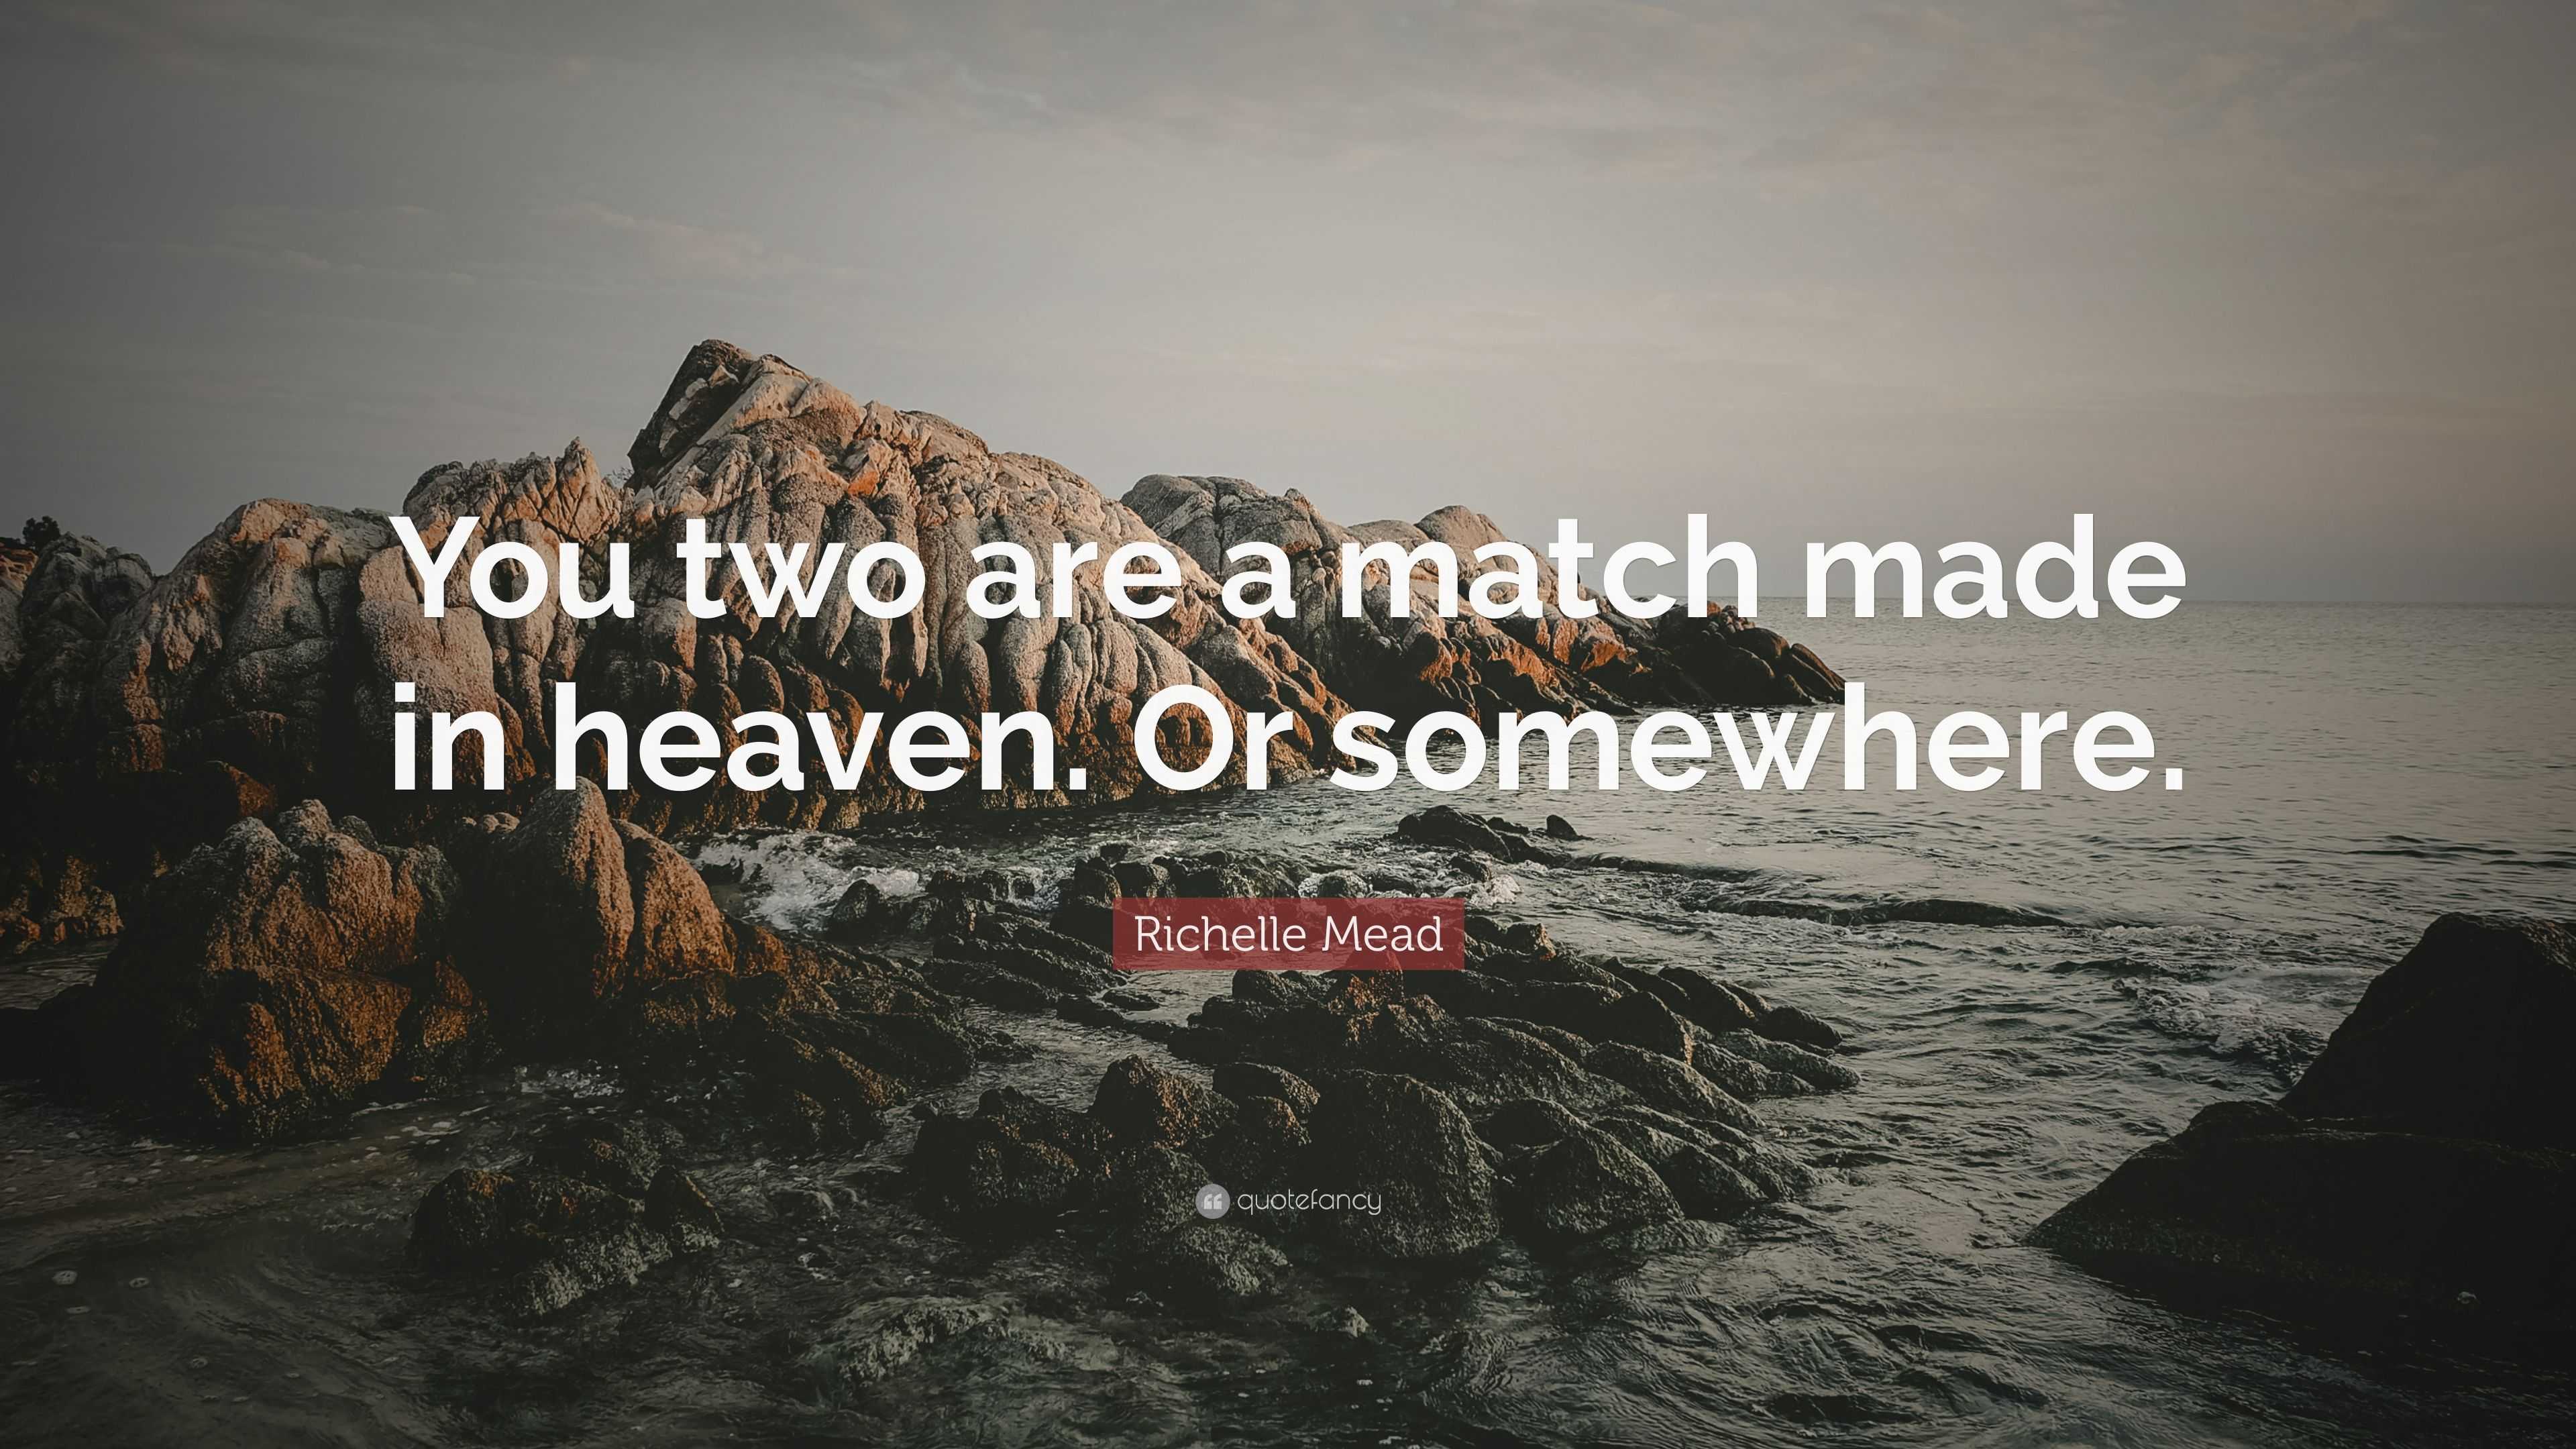 Richelle Mead Quote: “You two are a match made in heaven. Or somewhere.”